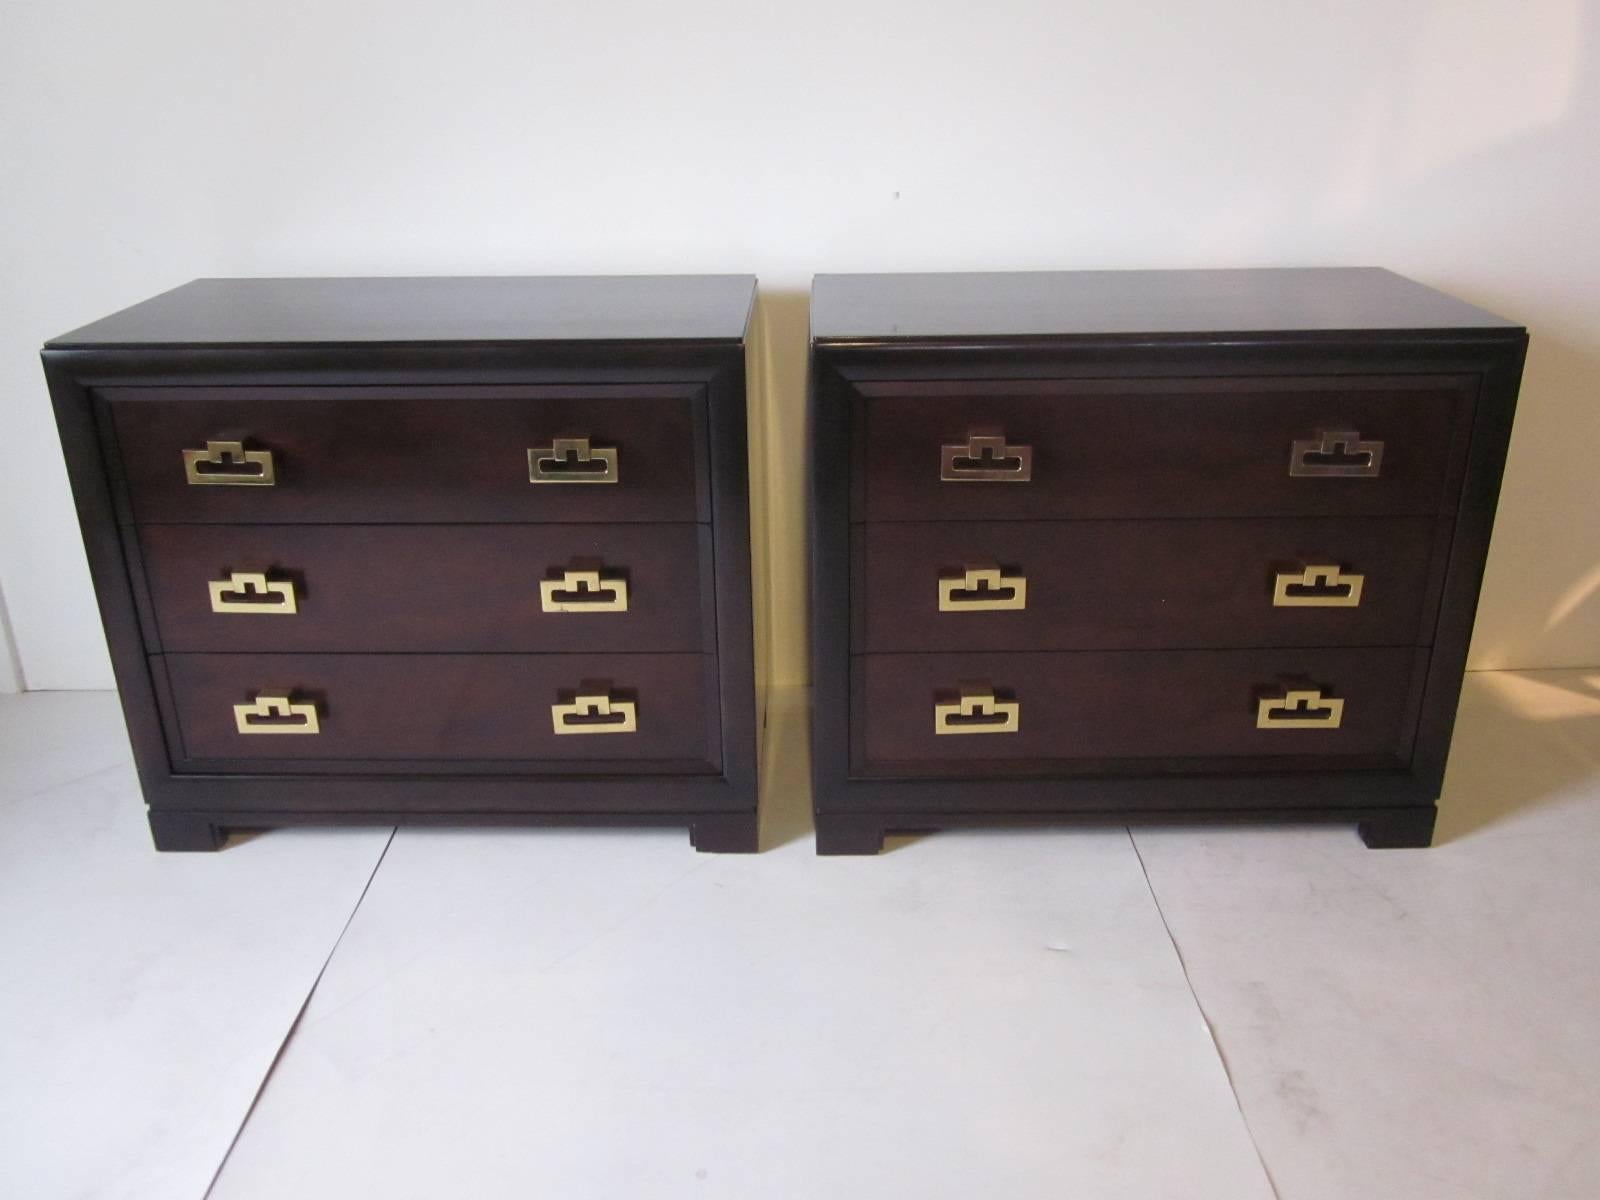 A pair of well crafted wooden chests in an ebony finish to the body and dark mahogany finish to the drawer fronts accented by heavy brass pulls in the style of Dunbar. The upper drawers have dividers and each has a accessory tray which slides from